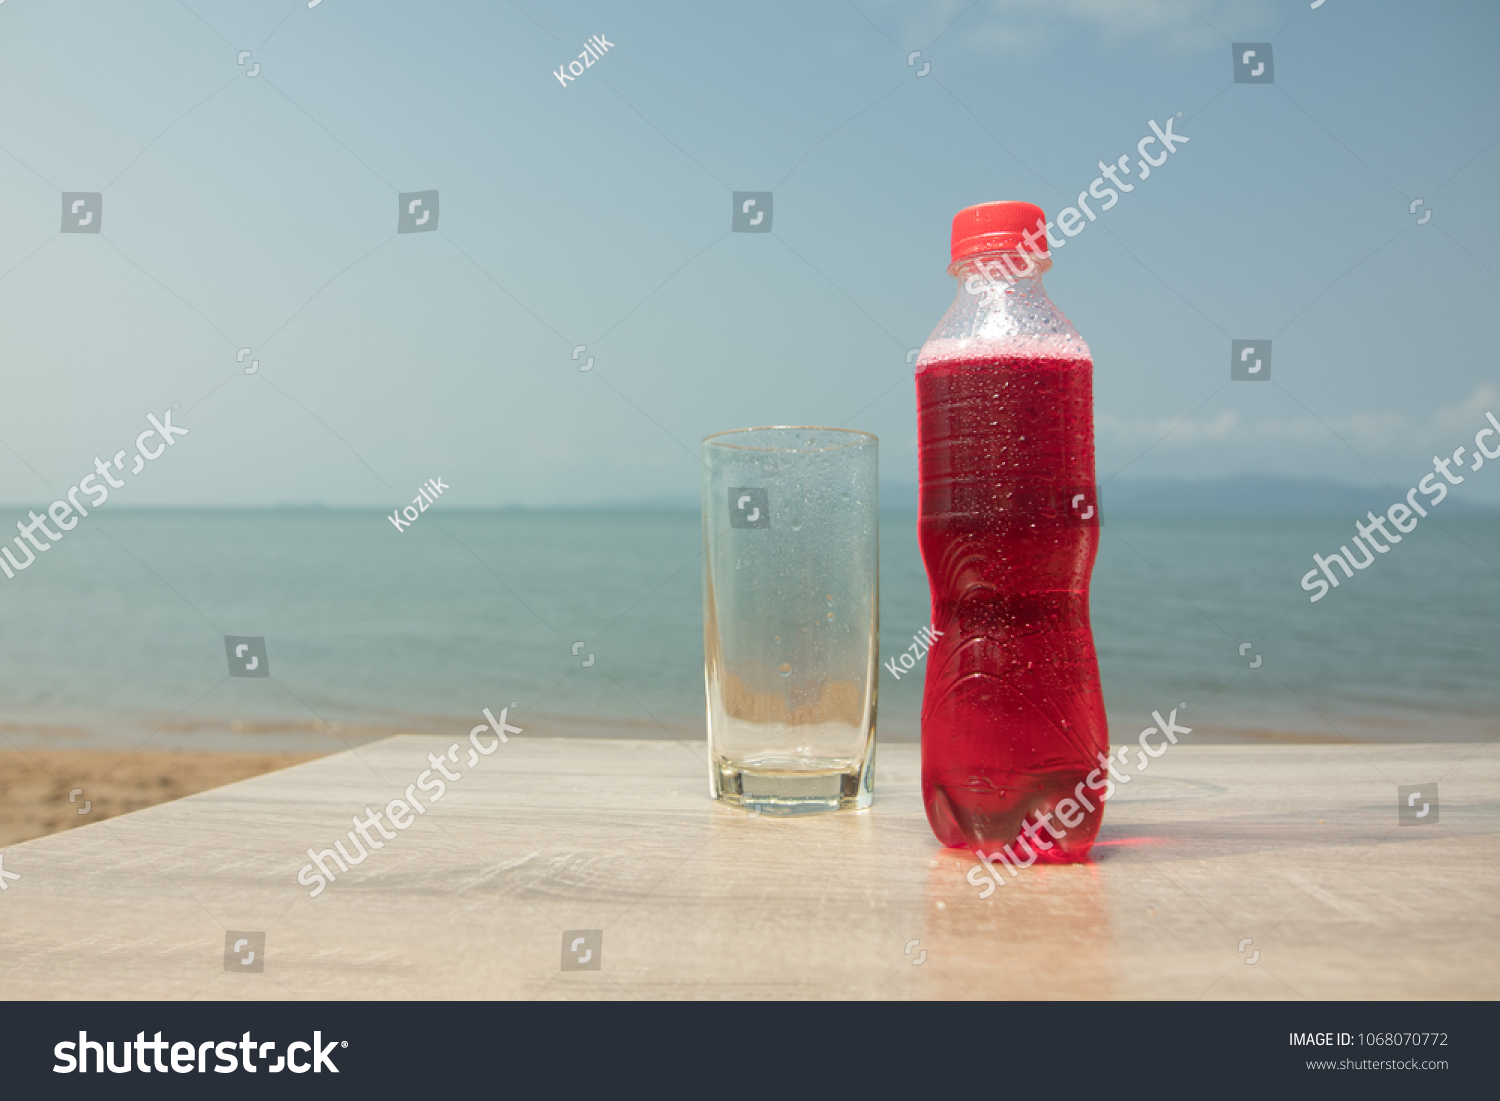 Download Bottles Multicolored Drinks Yellow Red Green Backgrounds Textures Stock Image 1068070772 Yellowimages Mockups